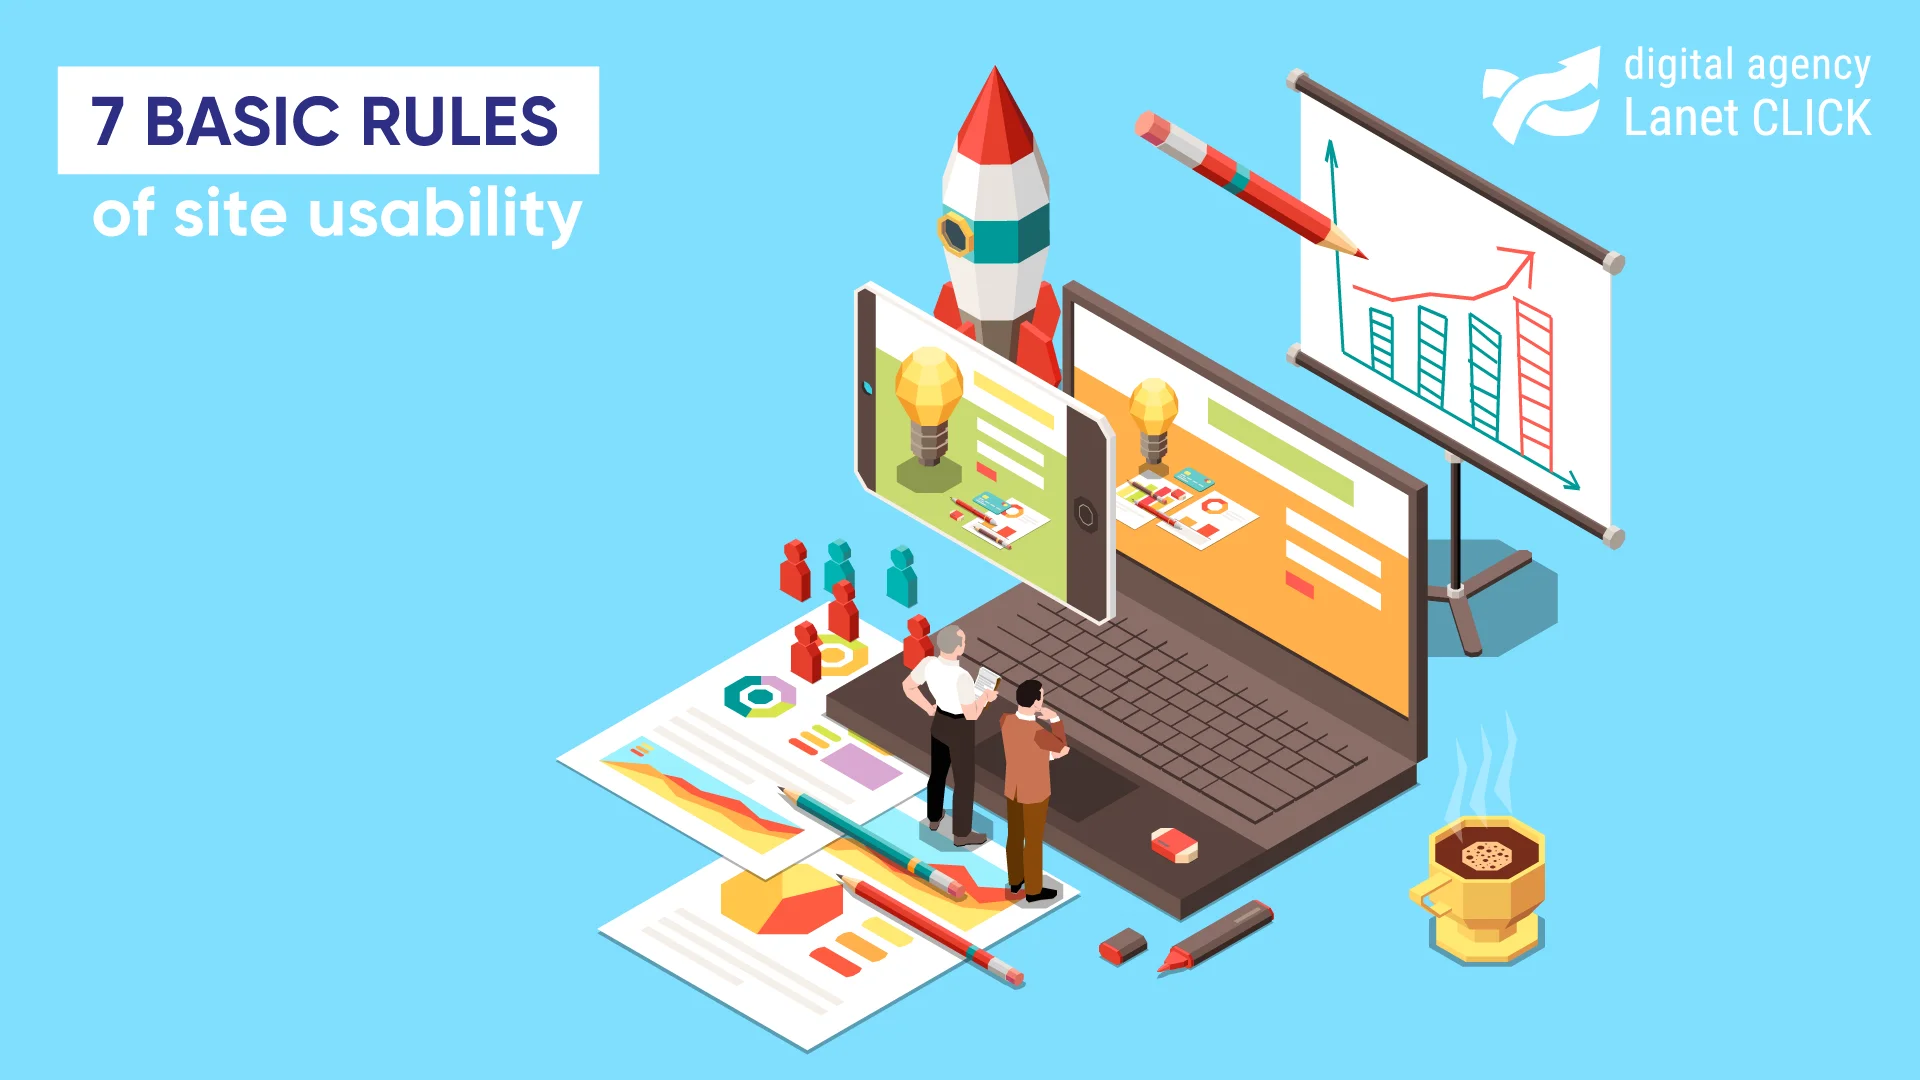 7 basic rules of site usability